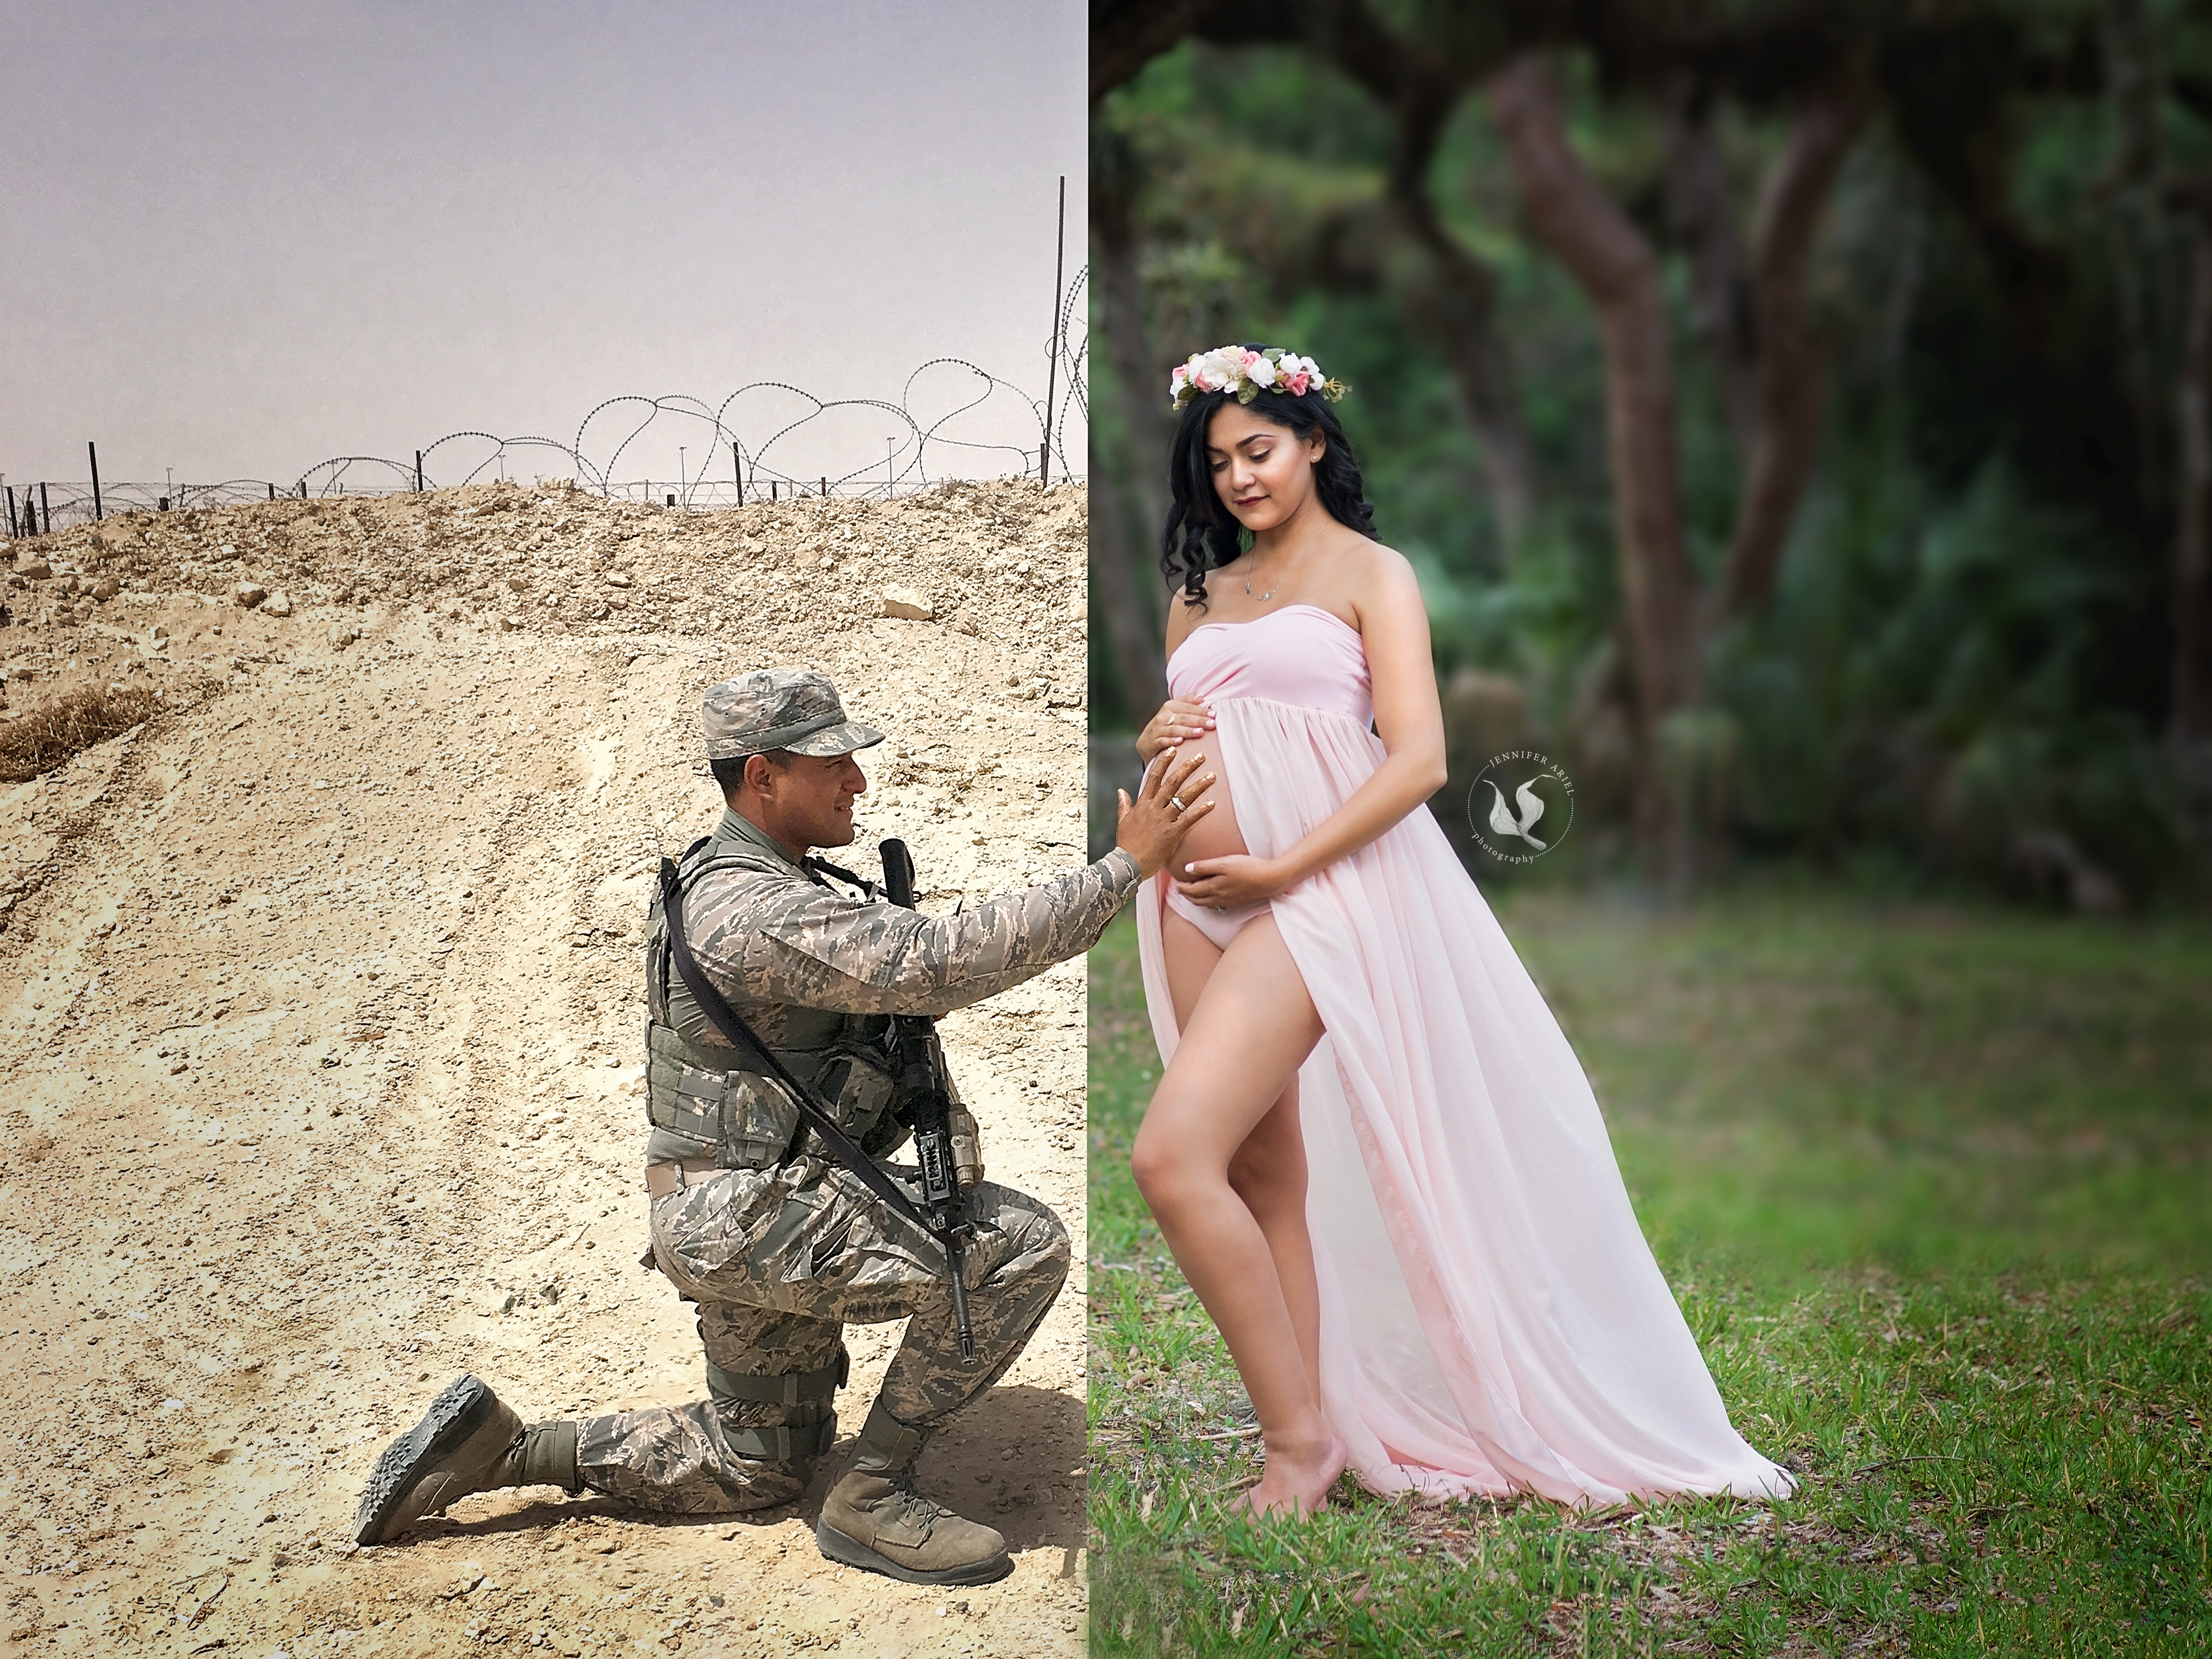 Touching maternity photos with a woman and her military husband ...